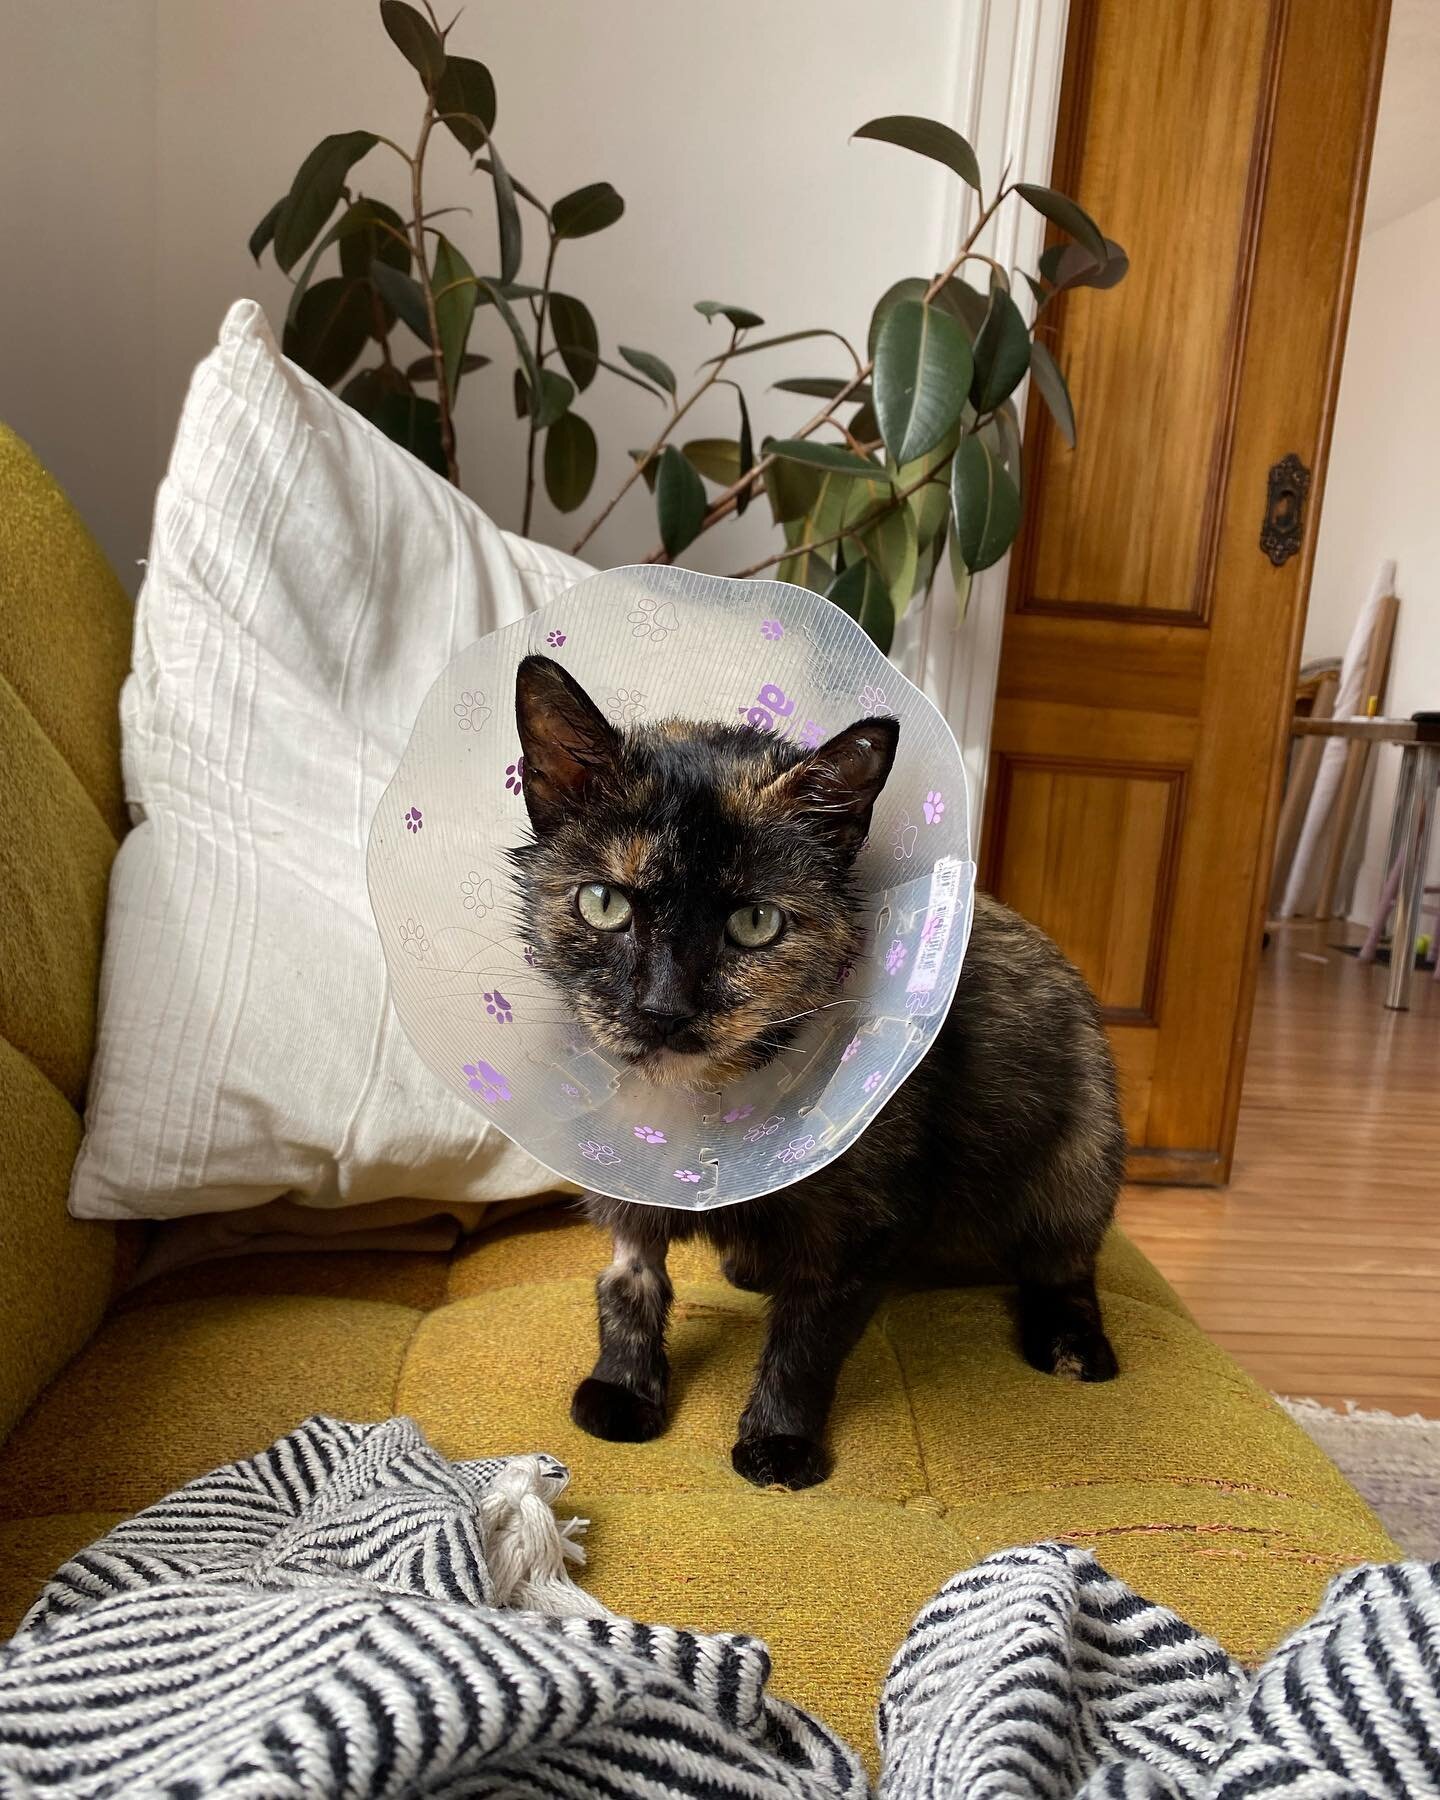 New to the crew is Claudia, who 2 weeks ago I live-trapped in my yard with a severed tail (bone and flesh exposed) that needed emer surgery alongside other minor injuries and ailments. She has a notched ear to indicate she was a spayed TNR feral cat 